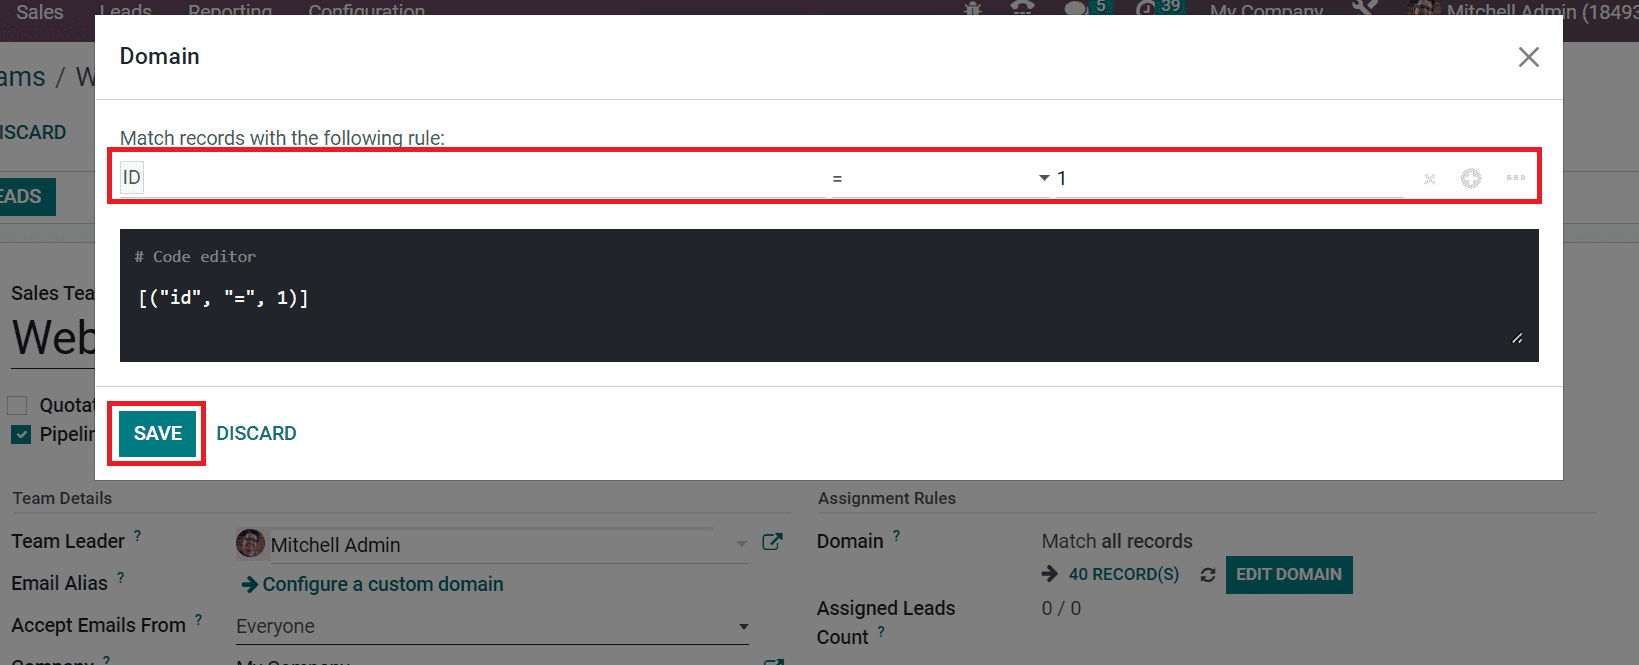 how-to-periodically-assign-leads-based-on-rules-in-odoo-16-crm-14-cybrosys